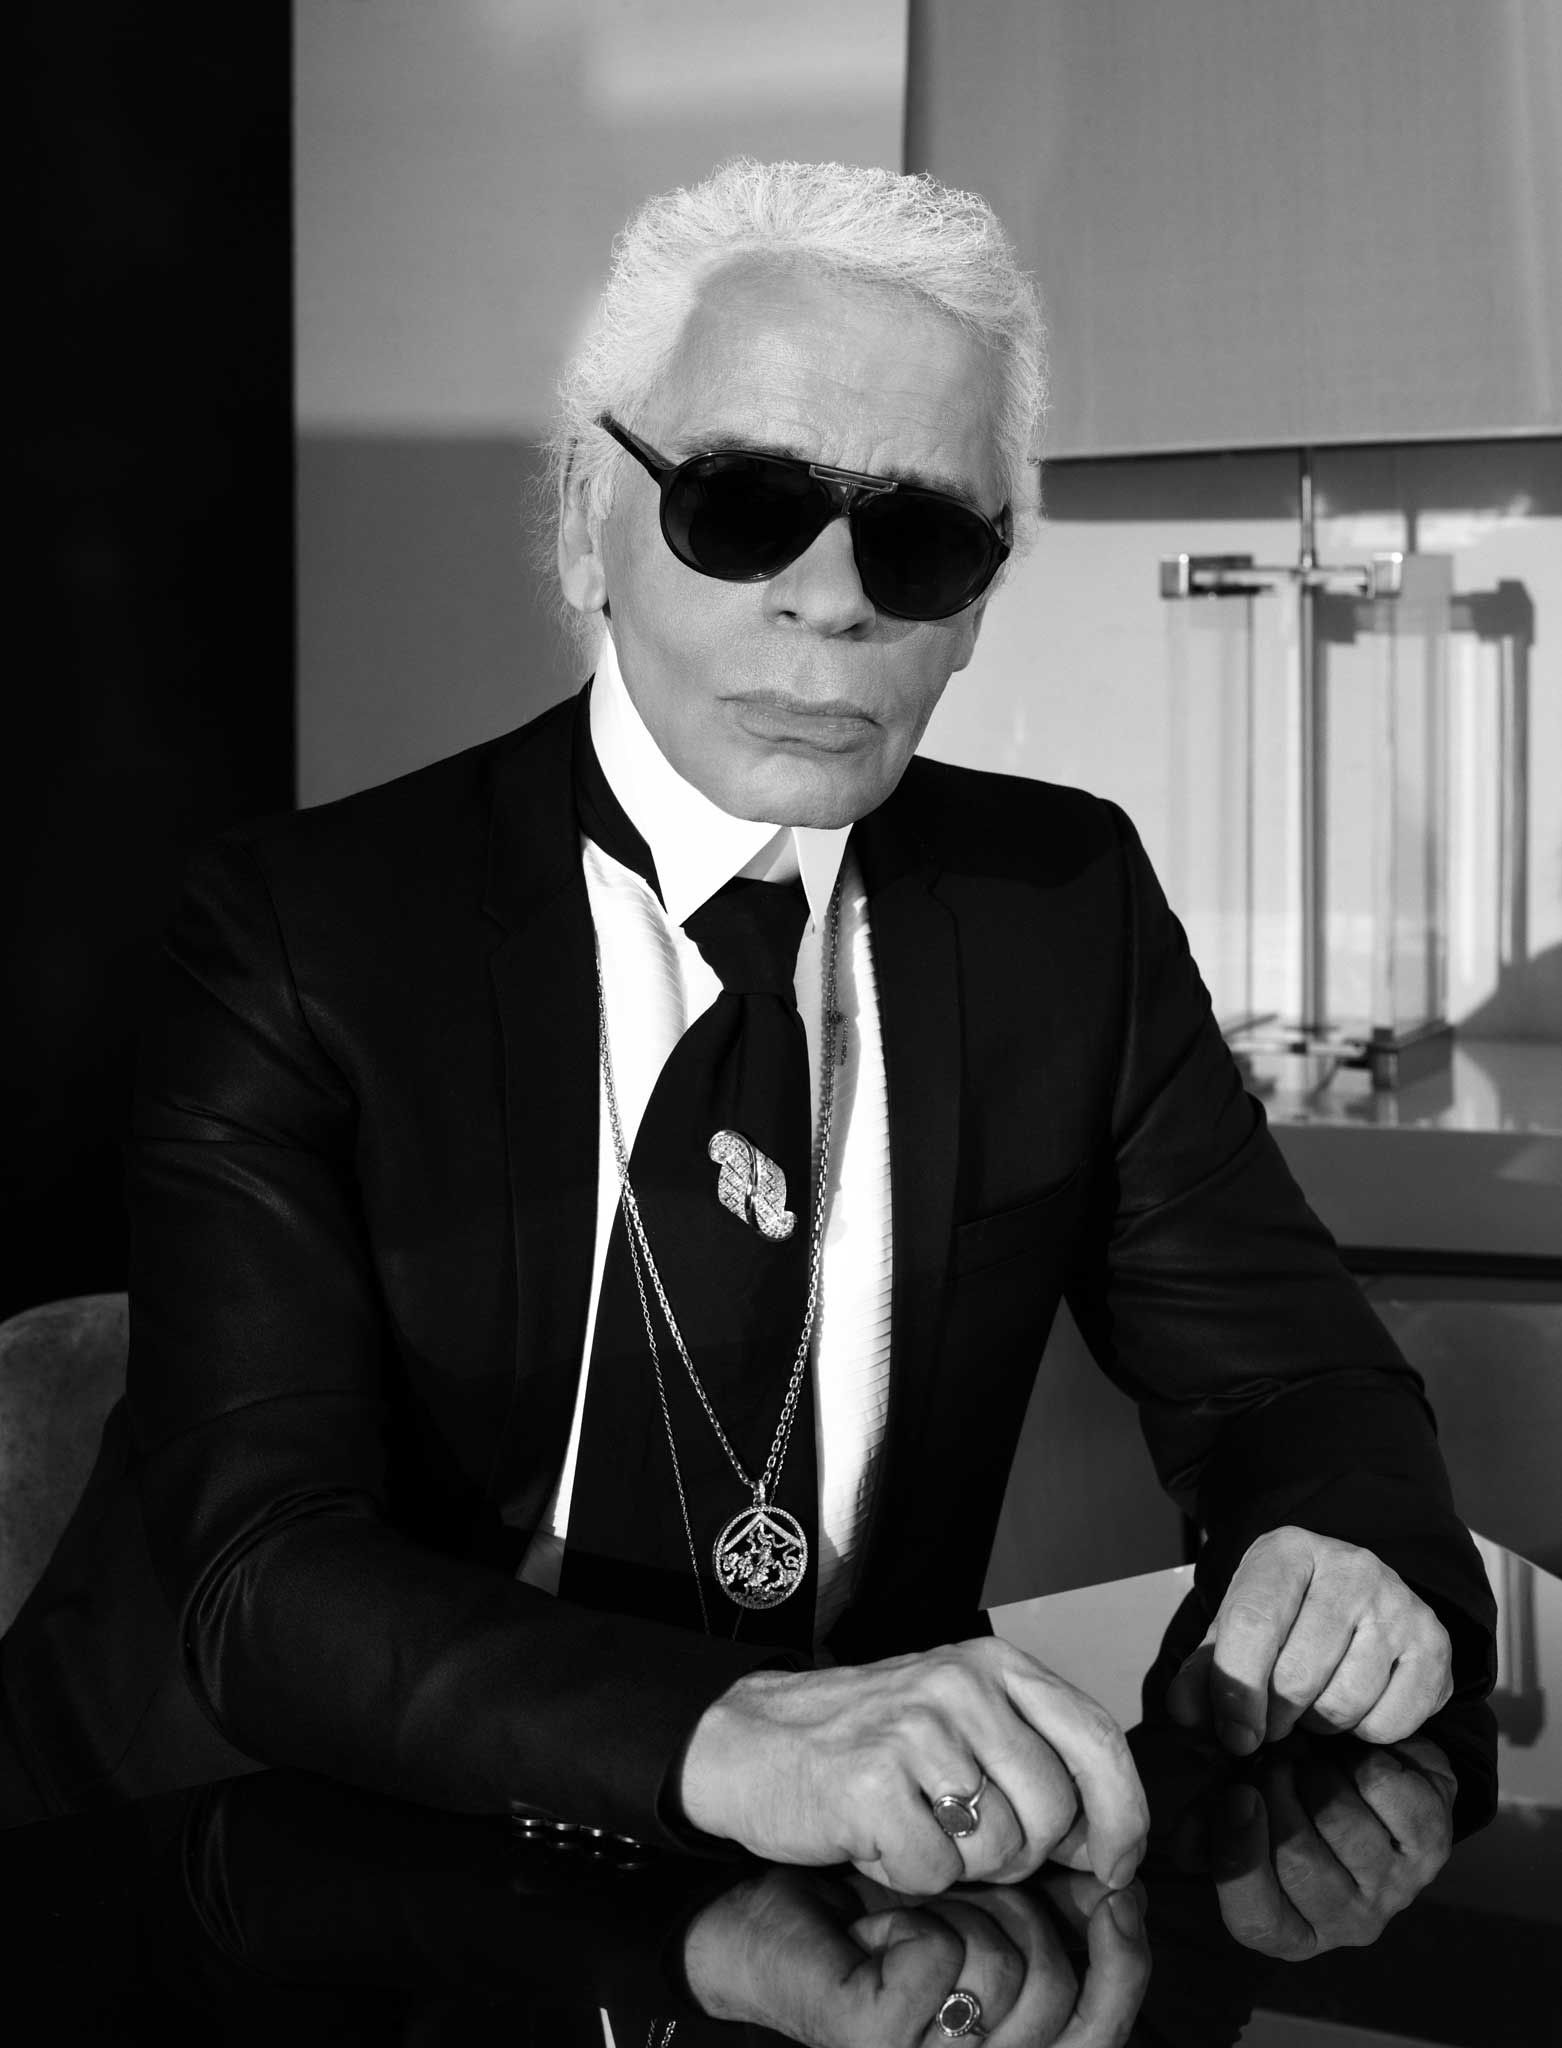 Thrifty ChoiceKarl Lagerfeld, 84, puts a spin on his signature style with  quirky, karl lagerfeld first chanel collection 